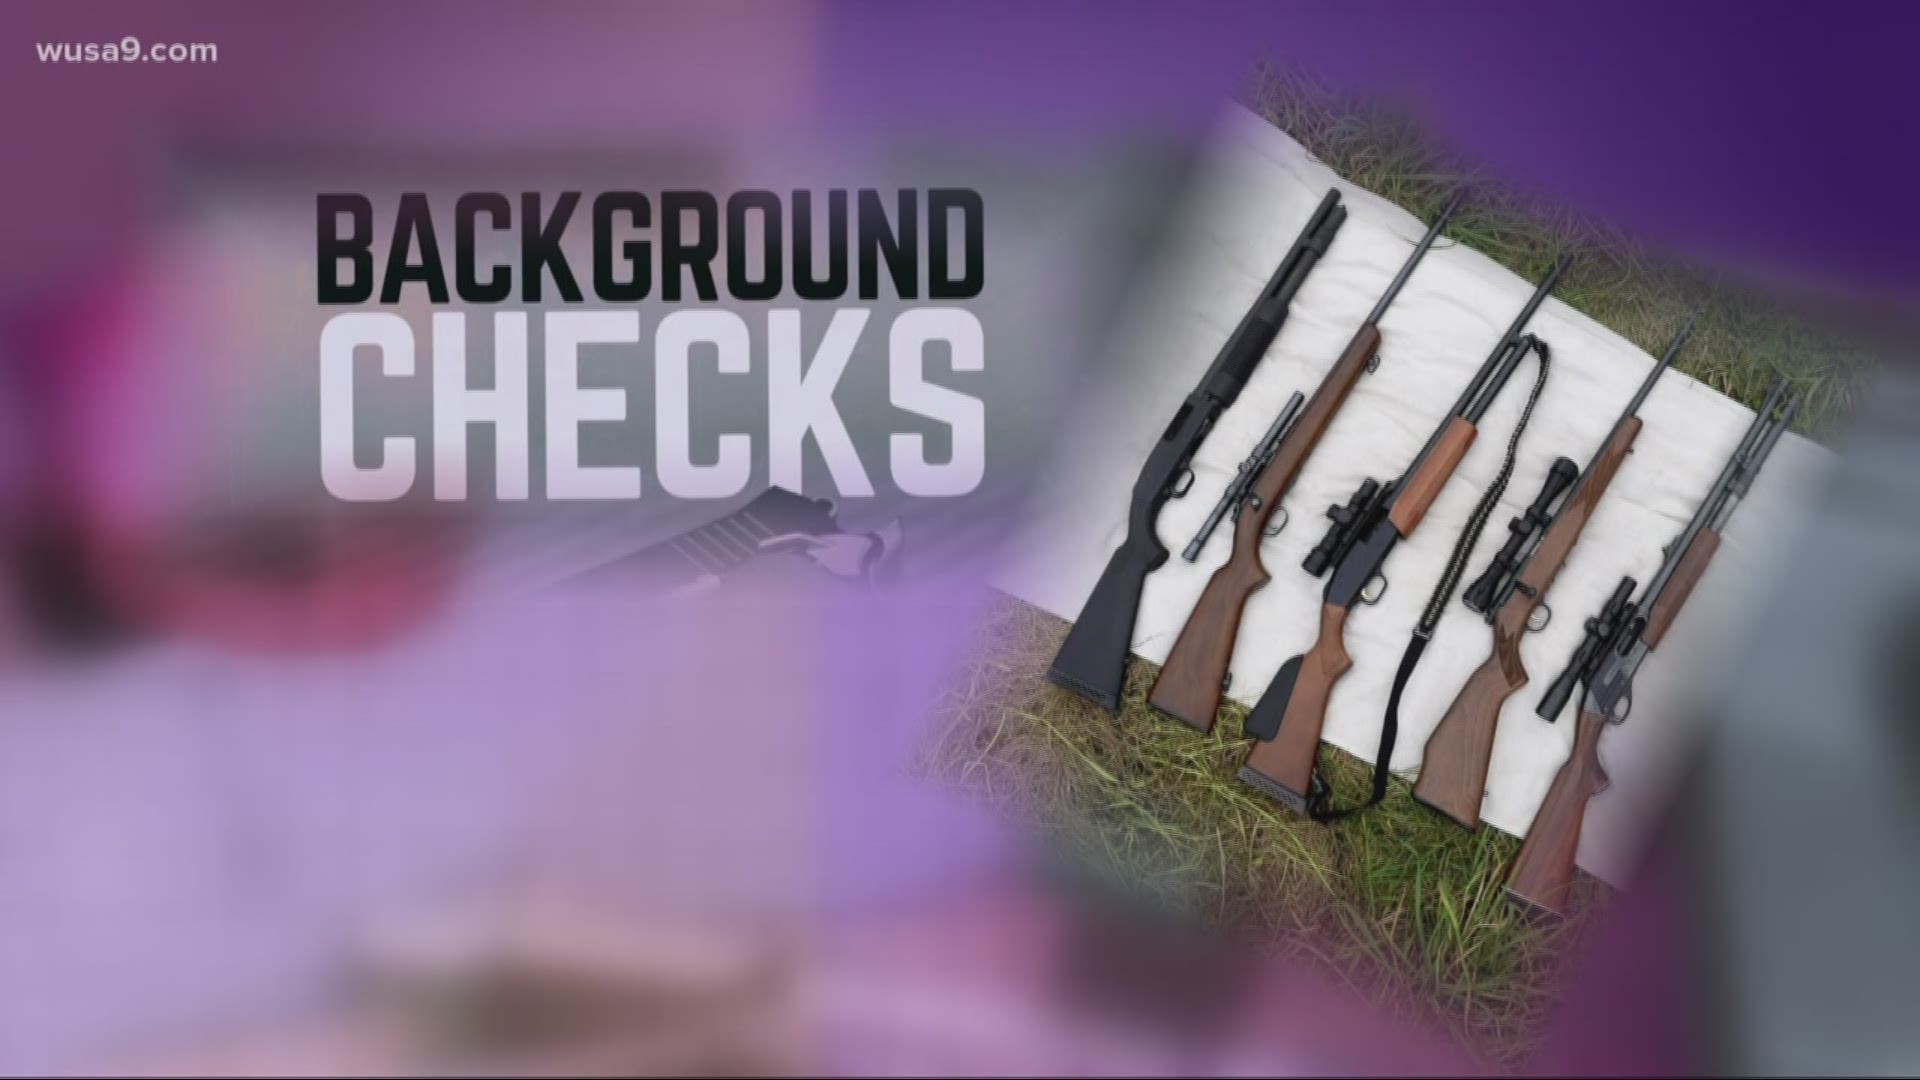 There's a big vote in the legislature on a bill to expand background checks for gun purchases in the State.